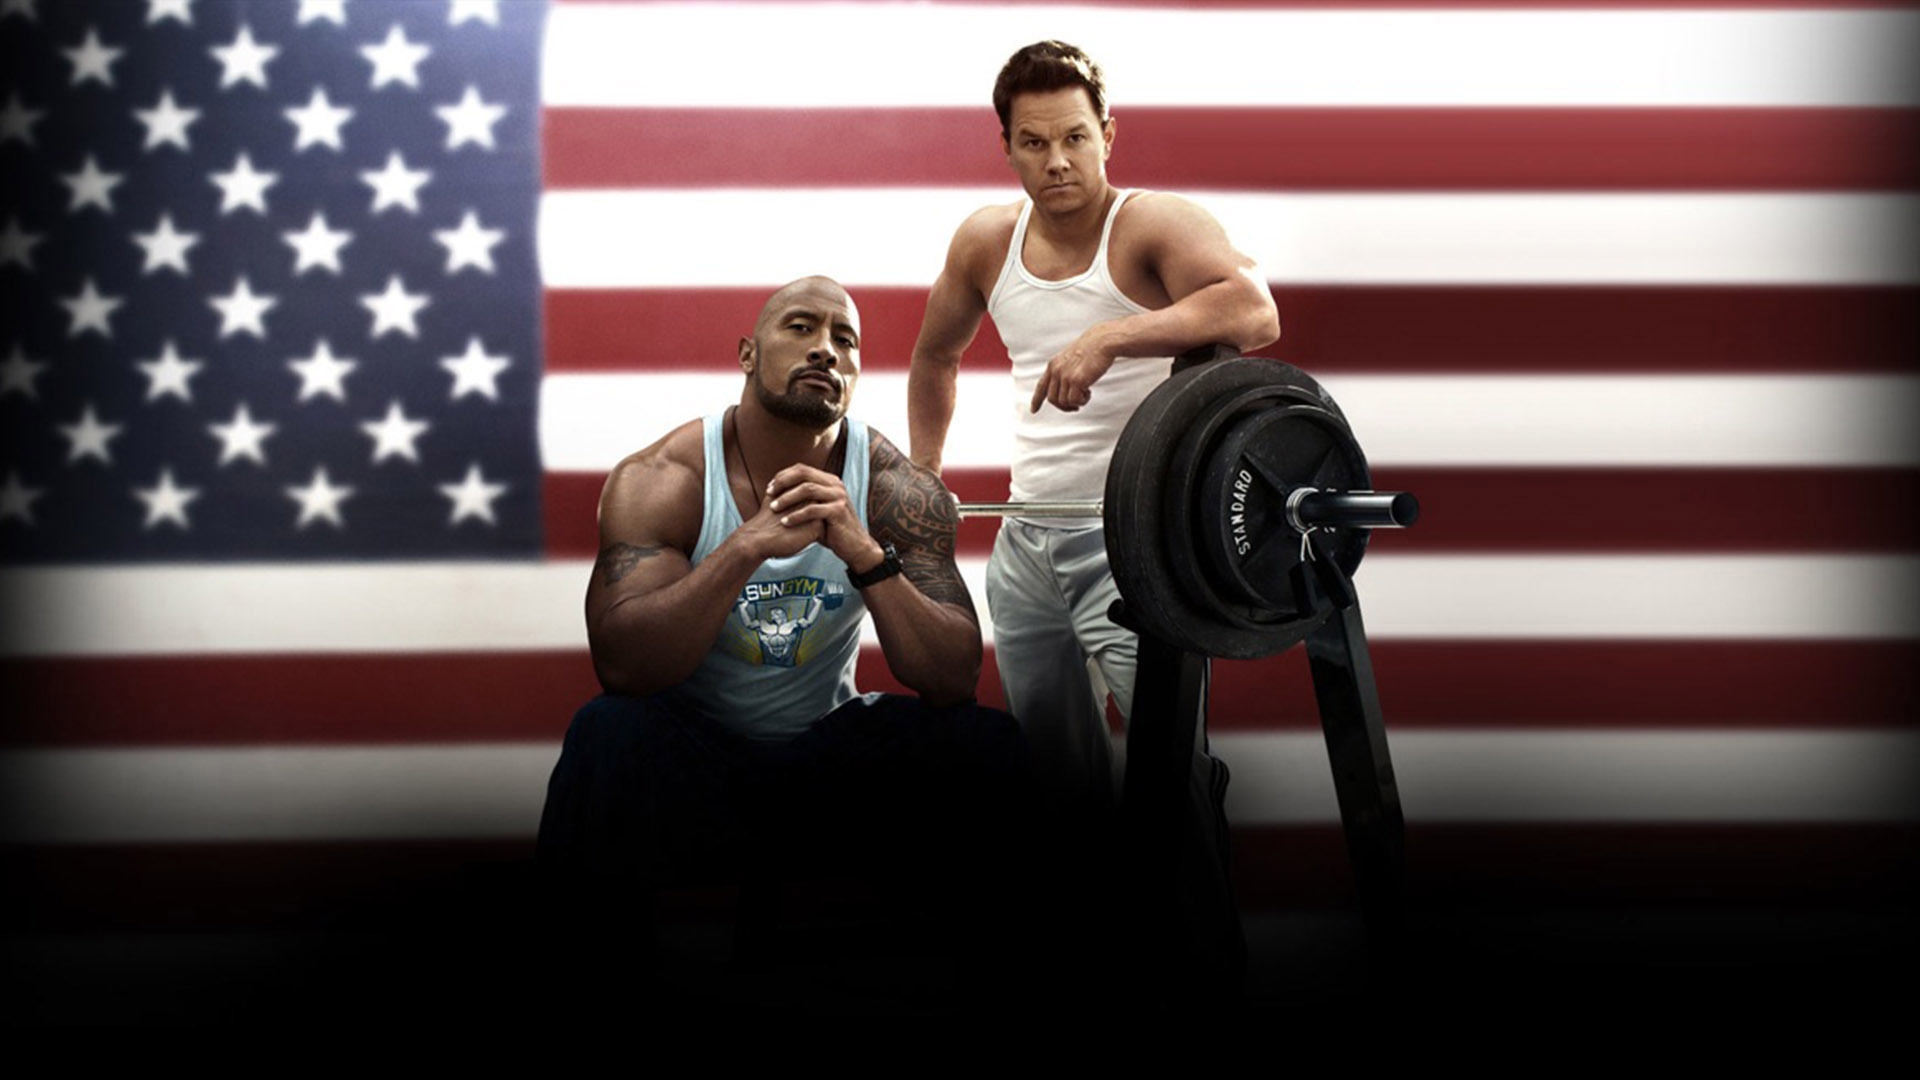 Pain and Gain 2013 for 1920 x 1080 HDTV 1080p resolution